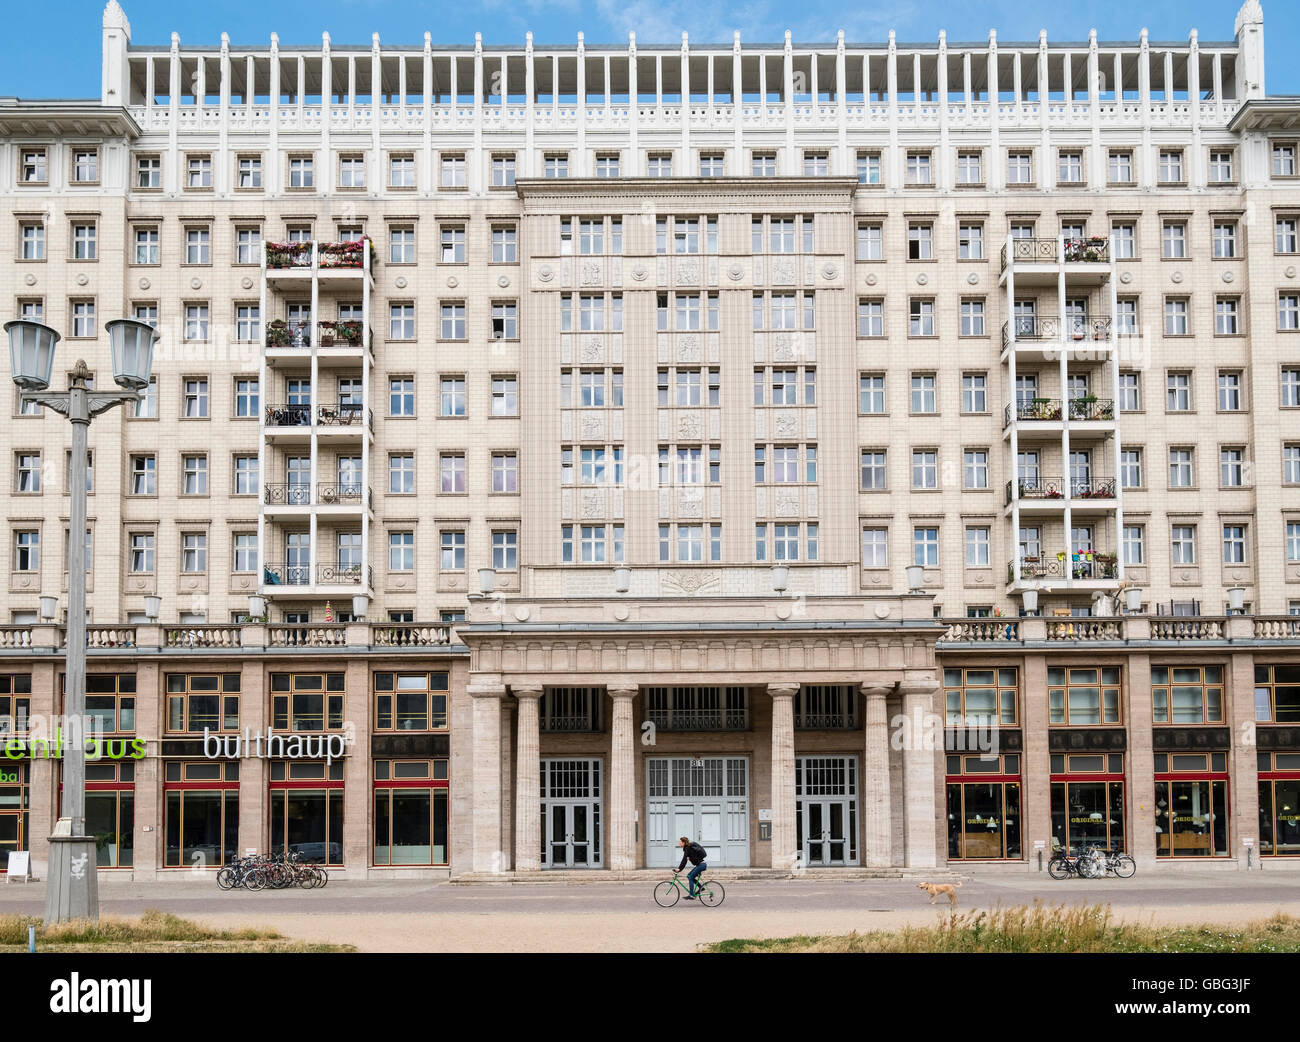 Cyclist rides past historic socialist former East German apartment buildings on Karl Marx Allee in Berlin Germany Stock Photo